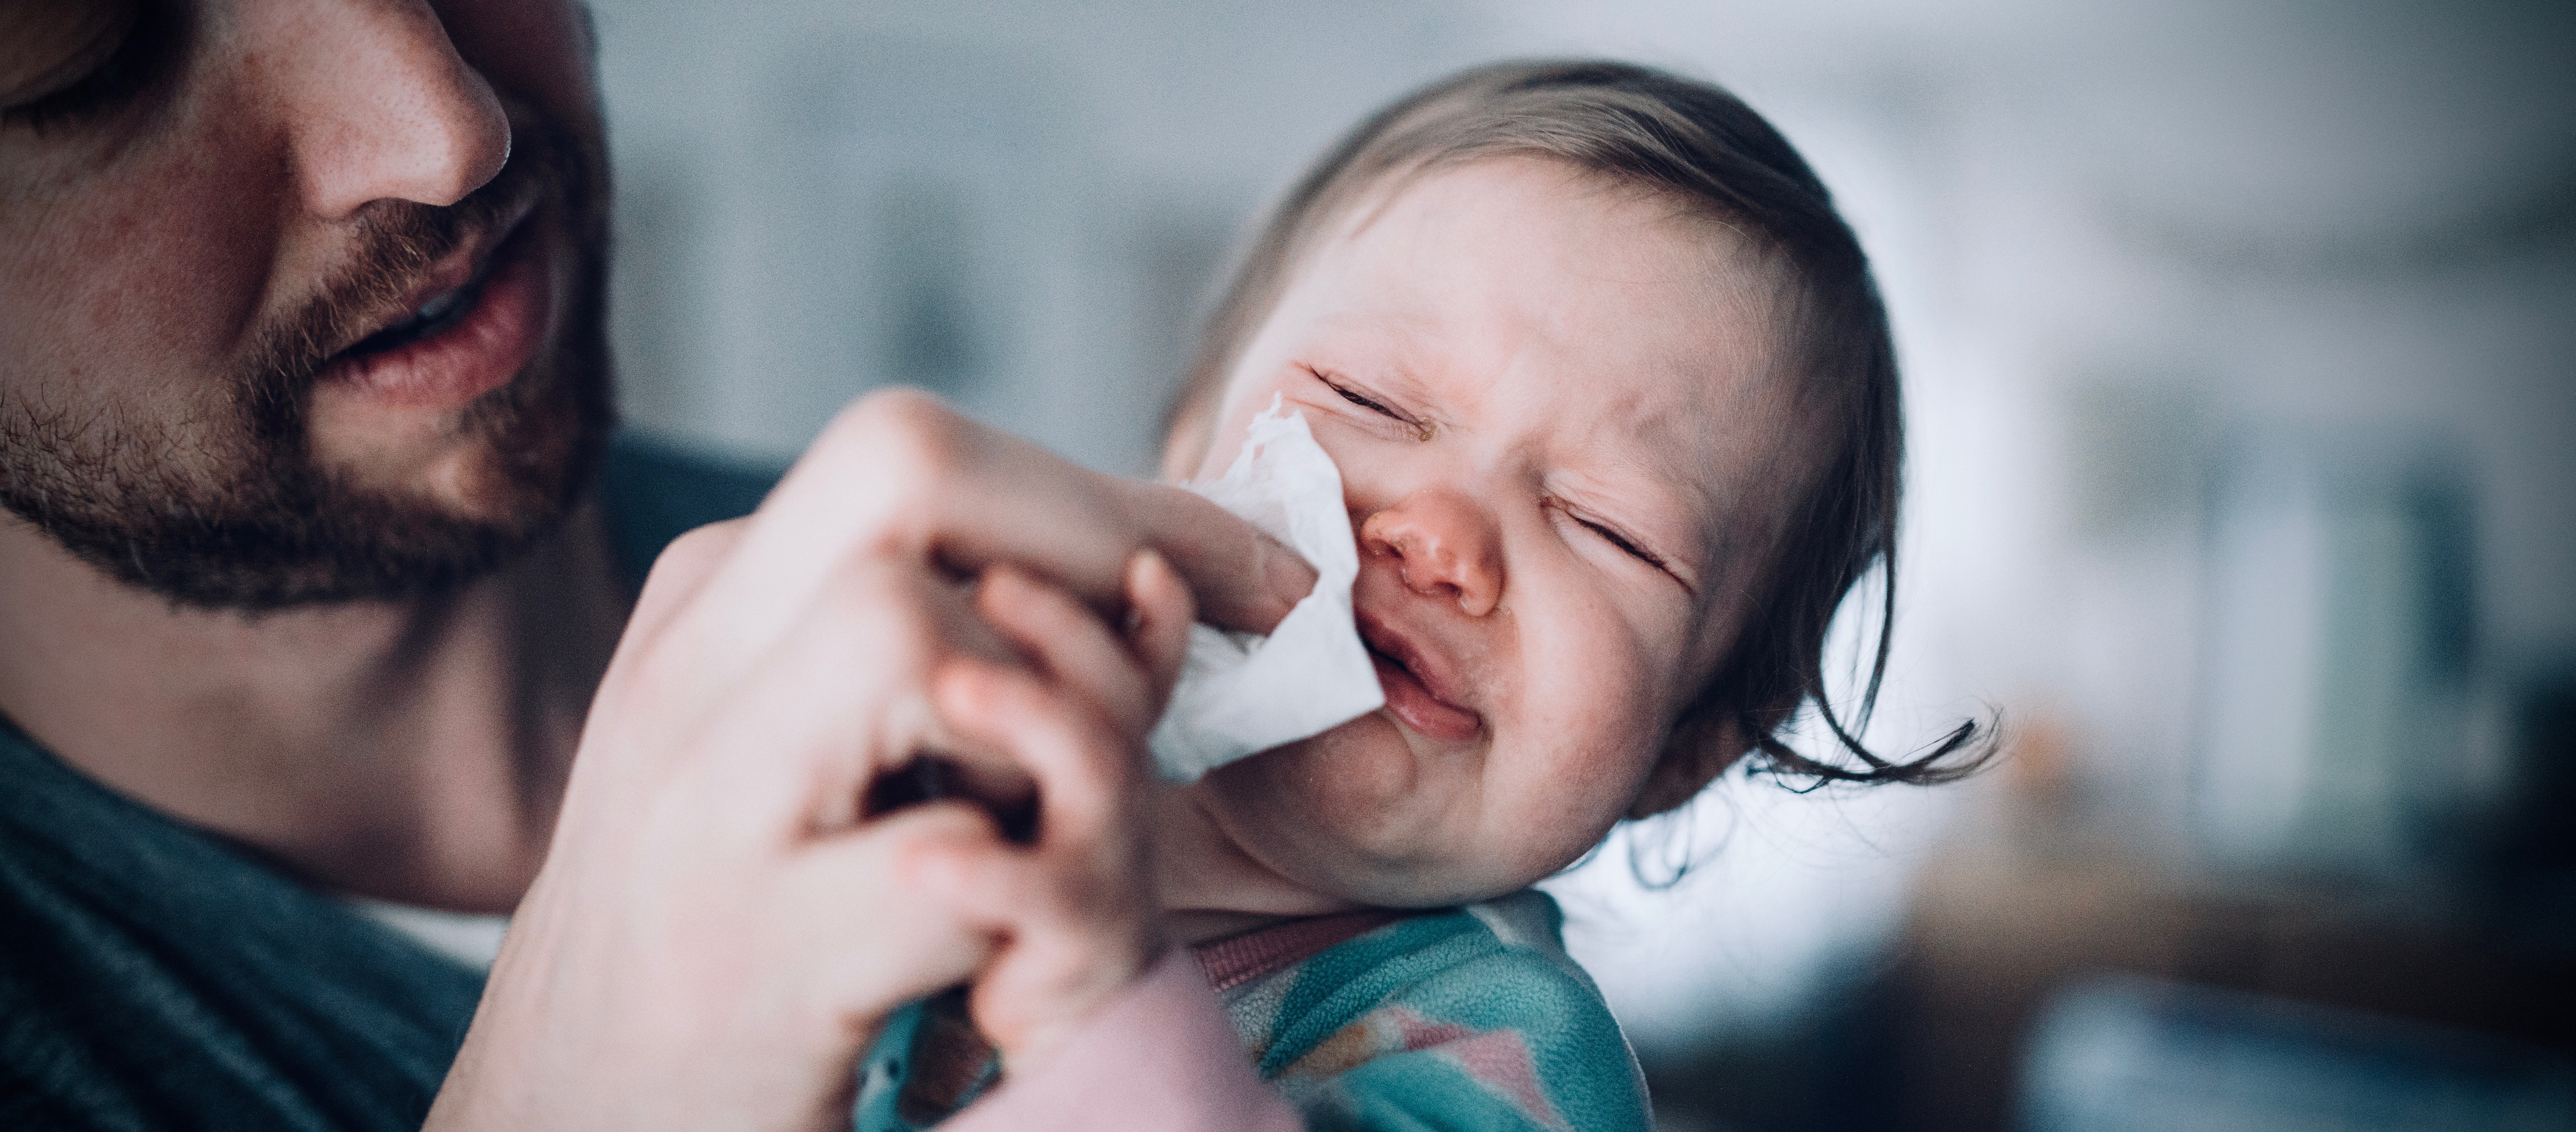 Bronchiolitis: A New Parent’s Guide to One of the Most Common Winter Illnesses